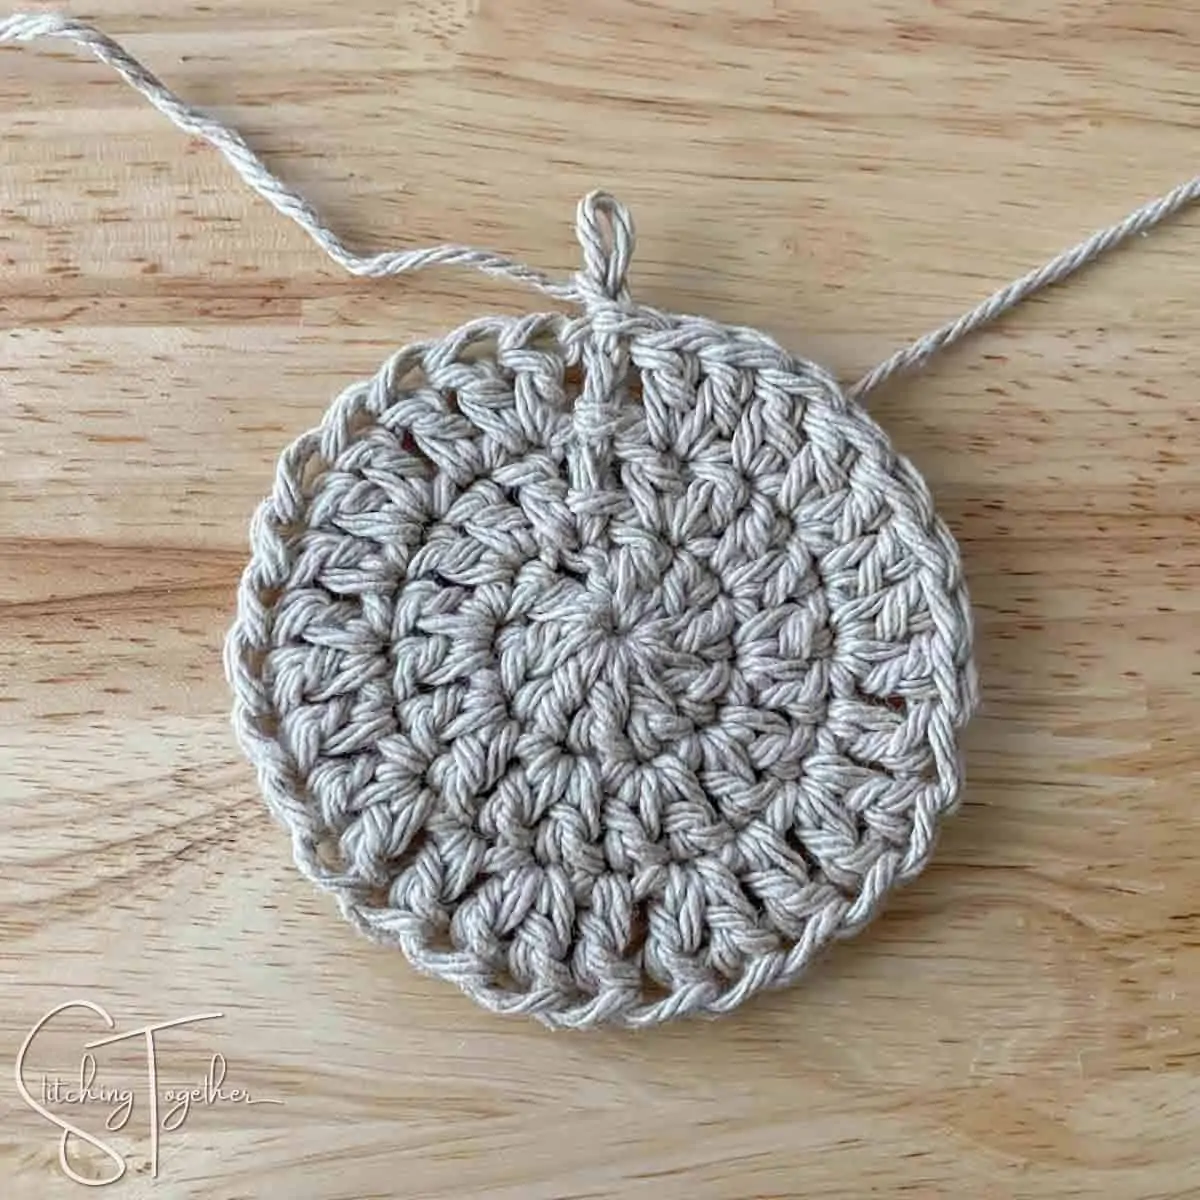 completed round 3 of crochet circle